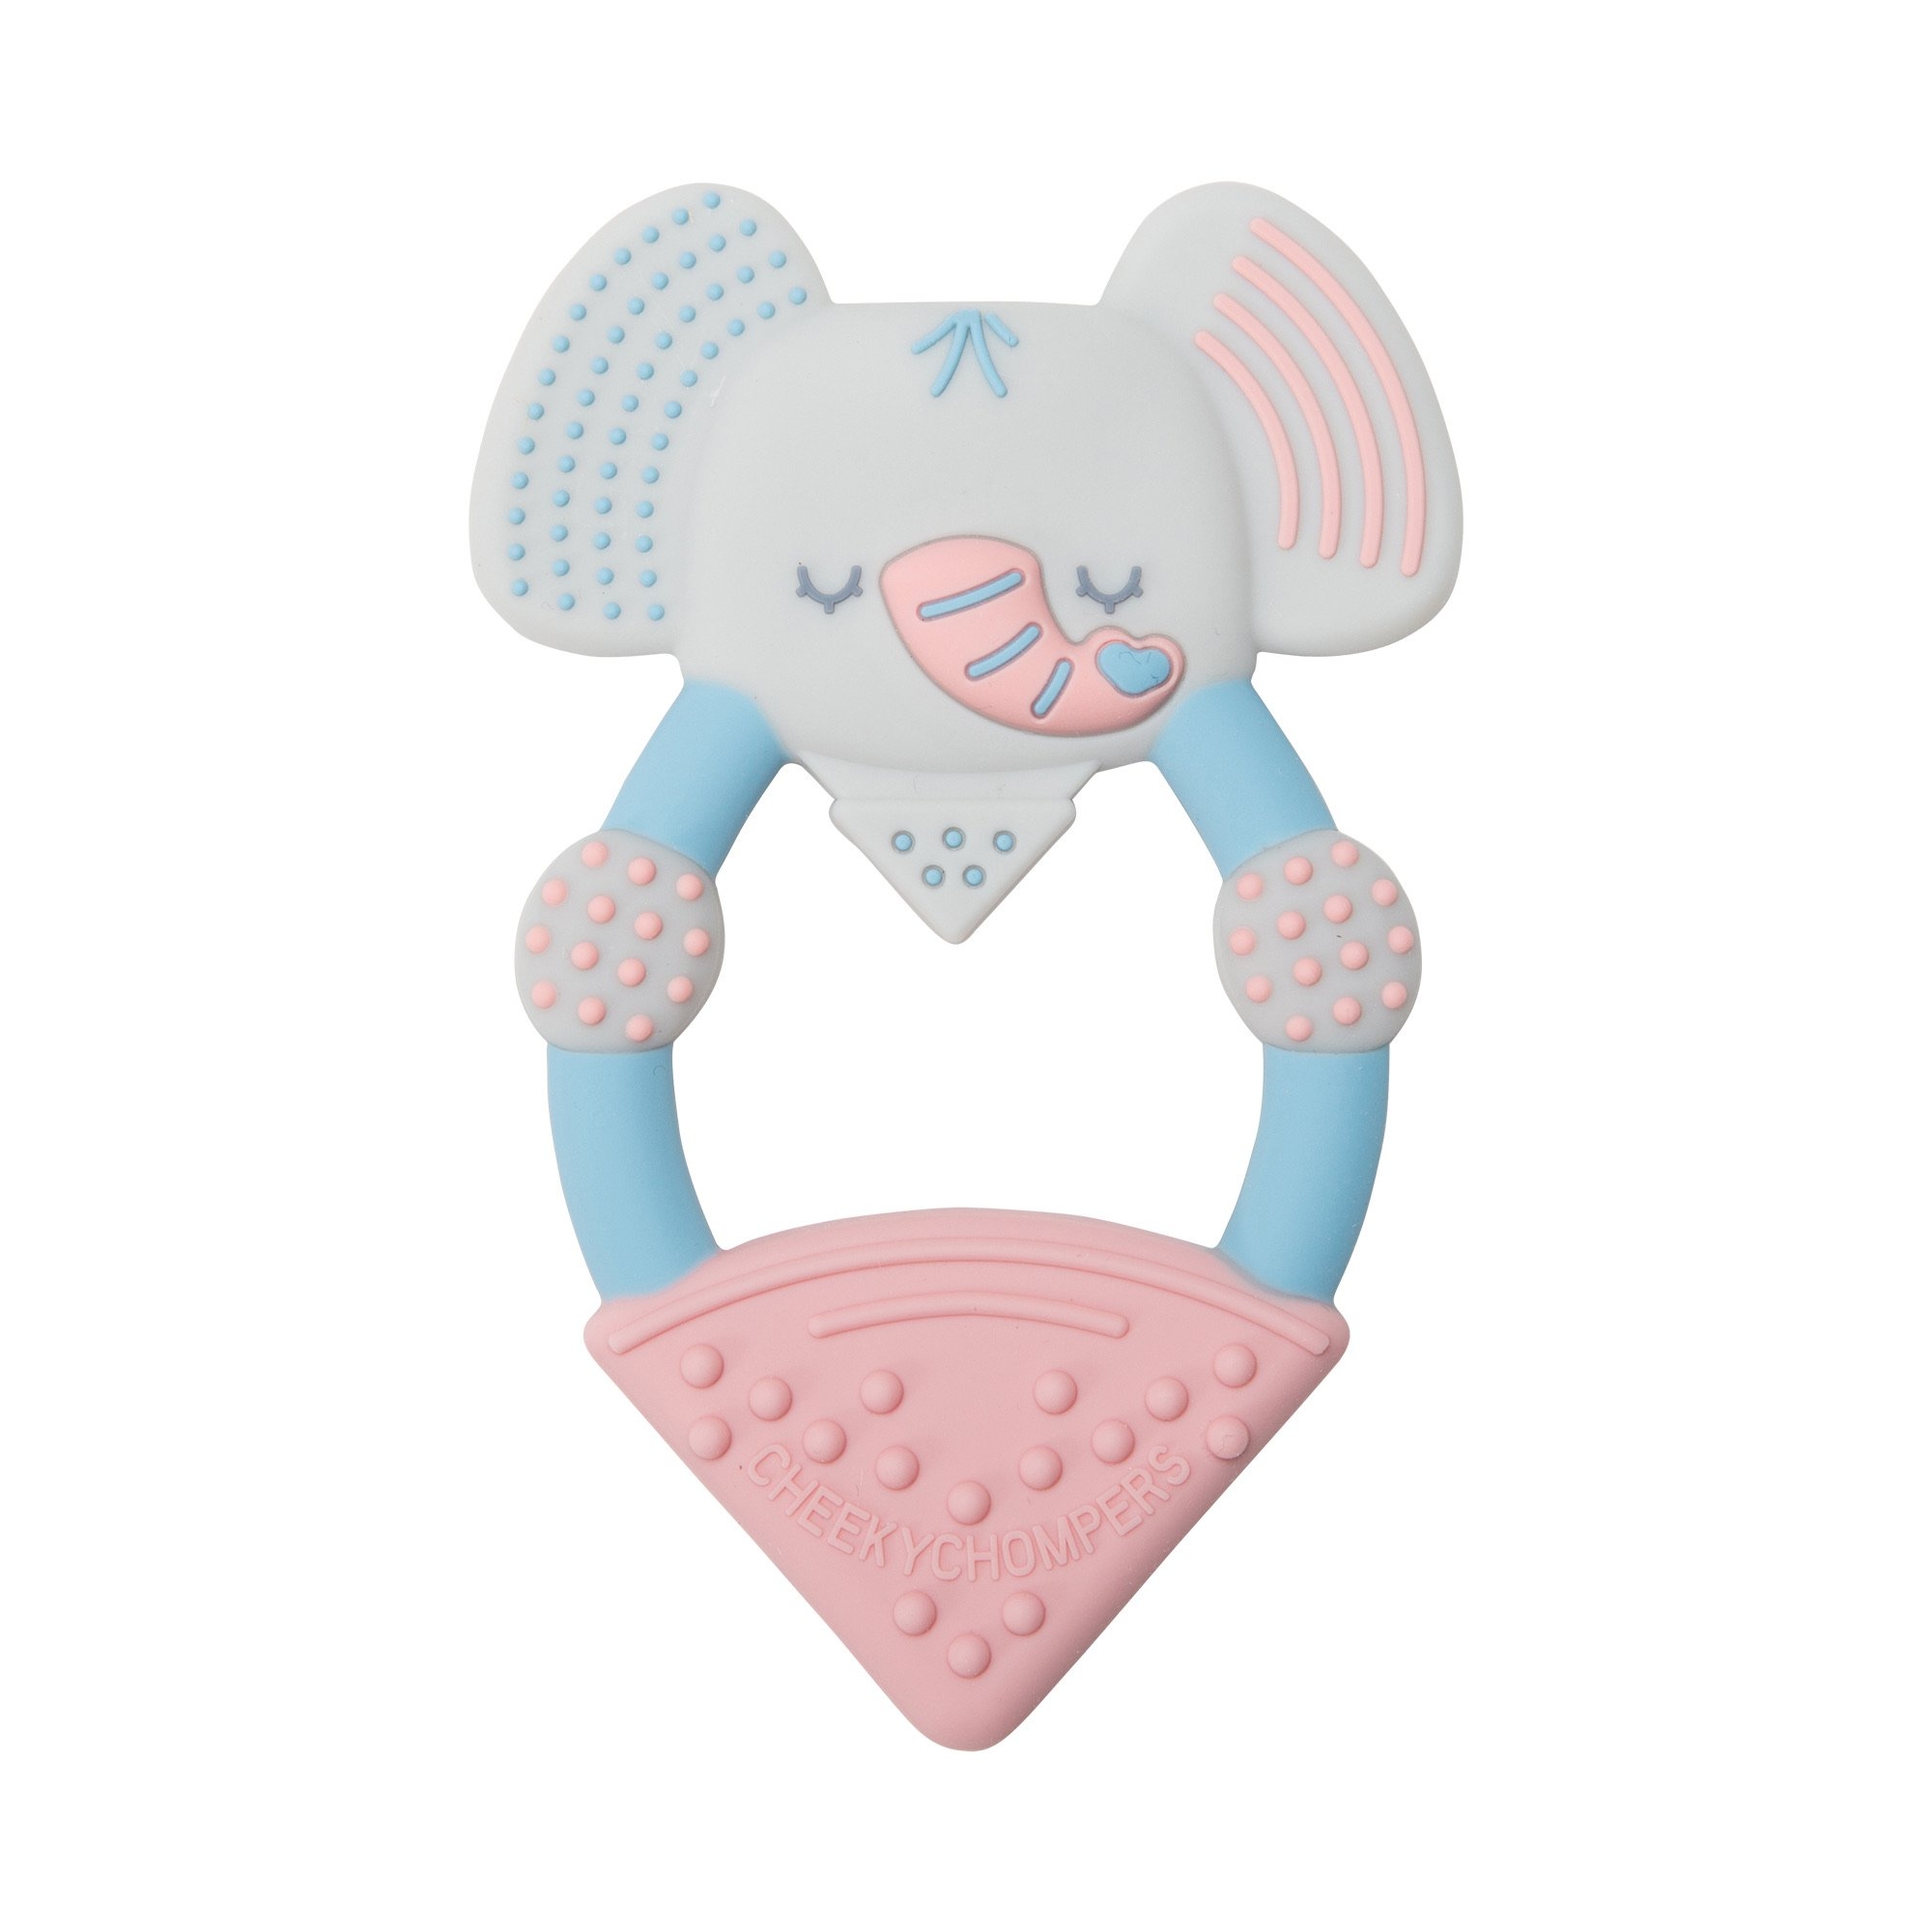 Cheeky Chompers Teething Toy Darcy The Elephant